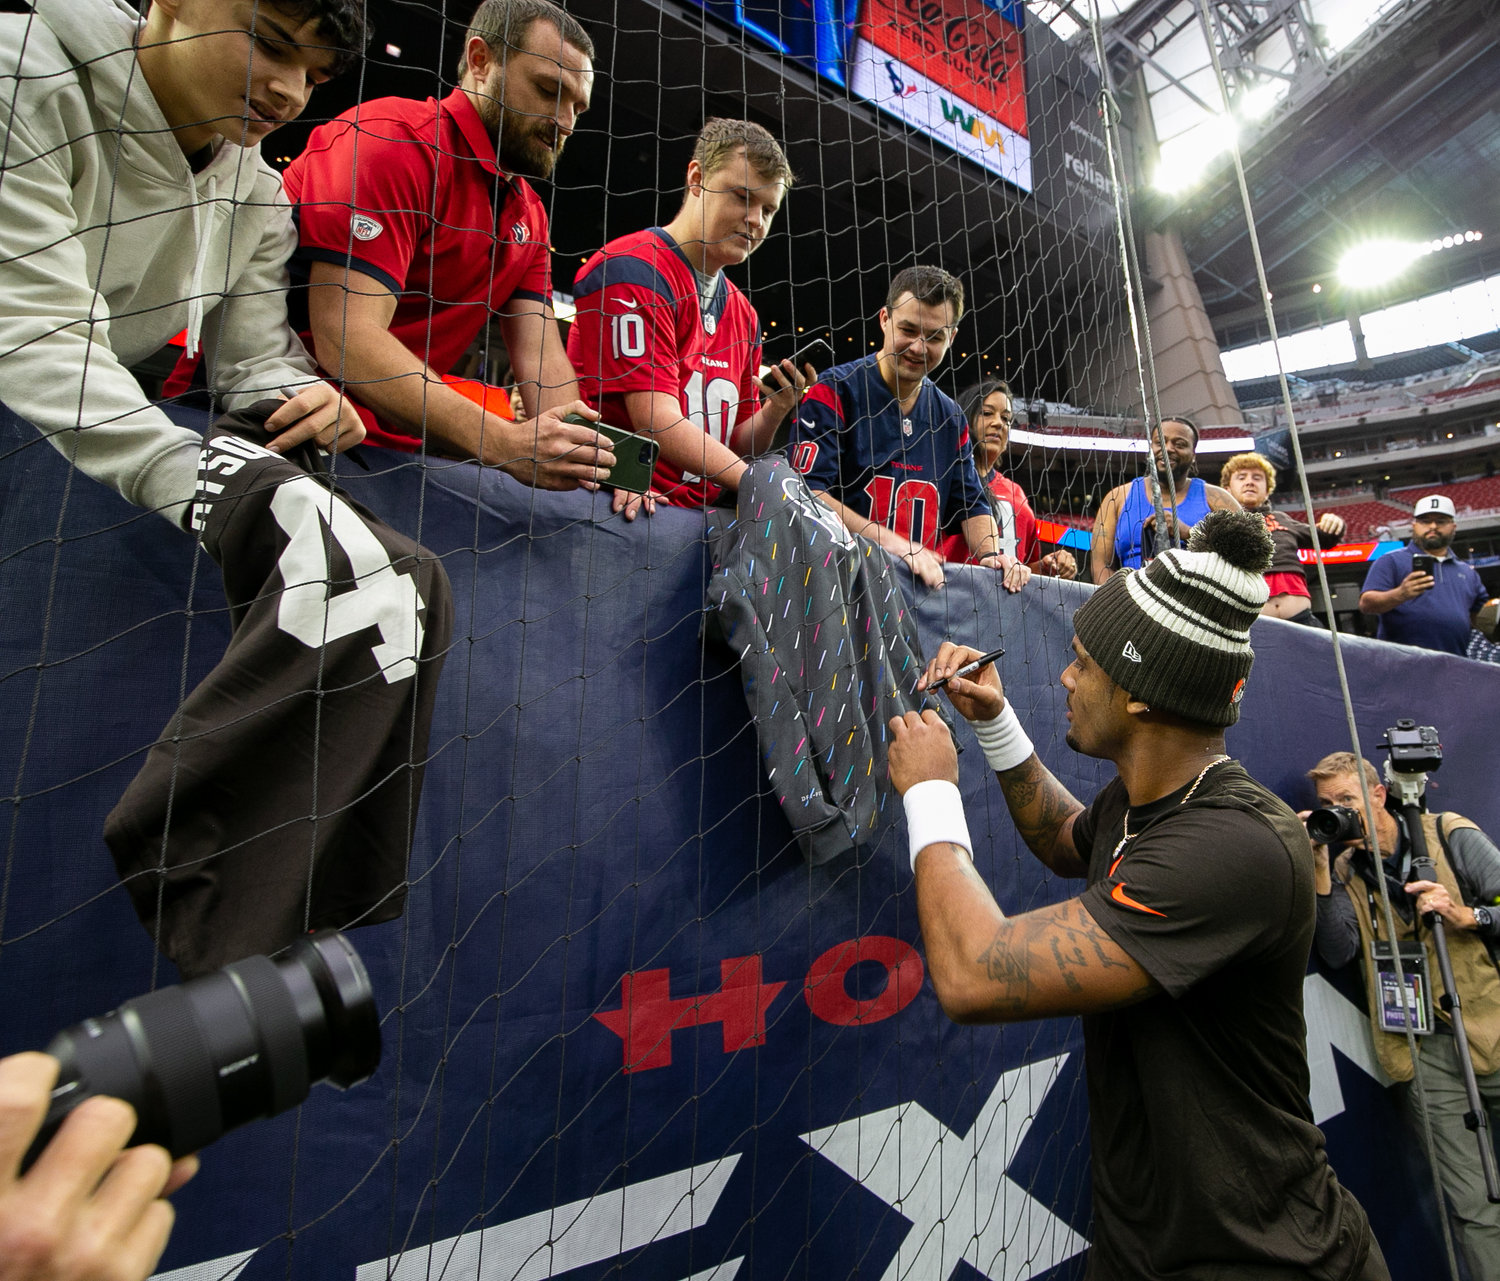 Former Houston Texans and current Cleveland Browns quarterback Deshaun Watson signs autographs before an NFL game on Dec. 4, 2022, in Houston. The game marks the controversial quarterback’s return to Houston and first game back after an 11-game suspension for allegations of sexual misconduct during his tenure with the Texans.